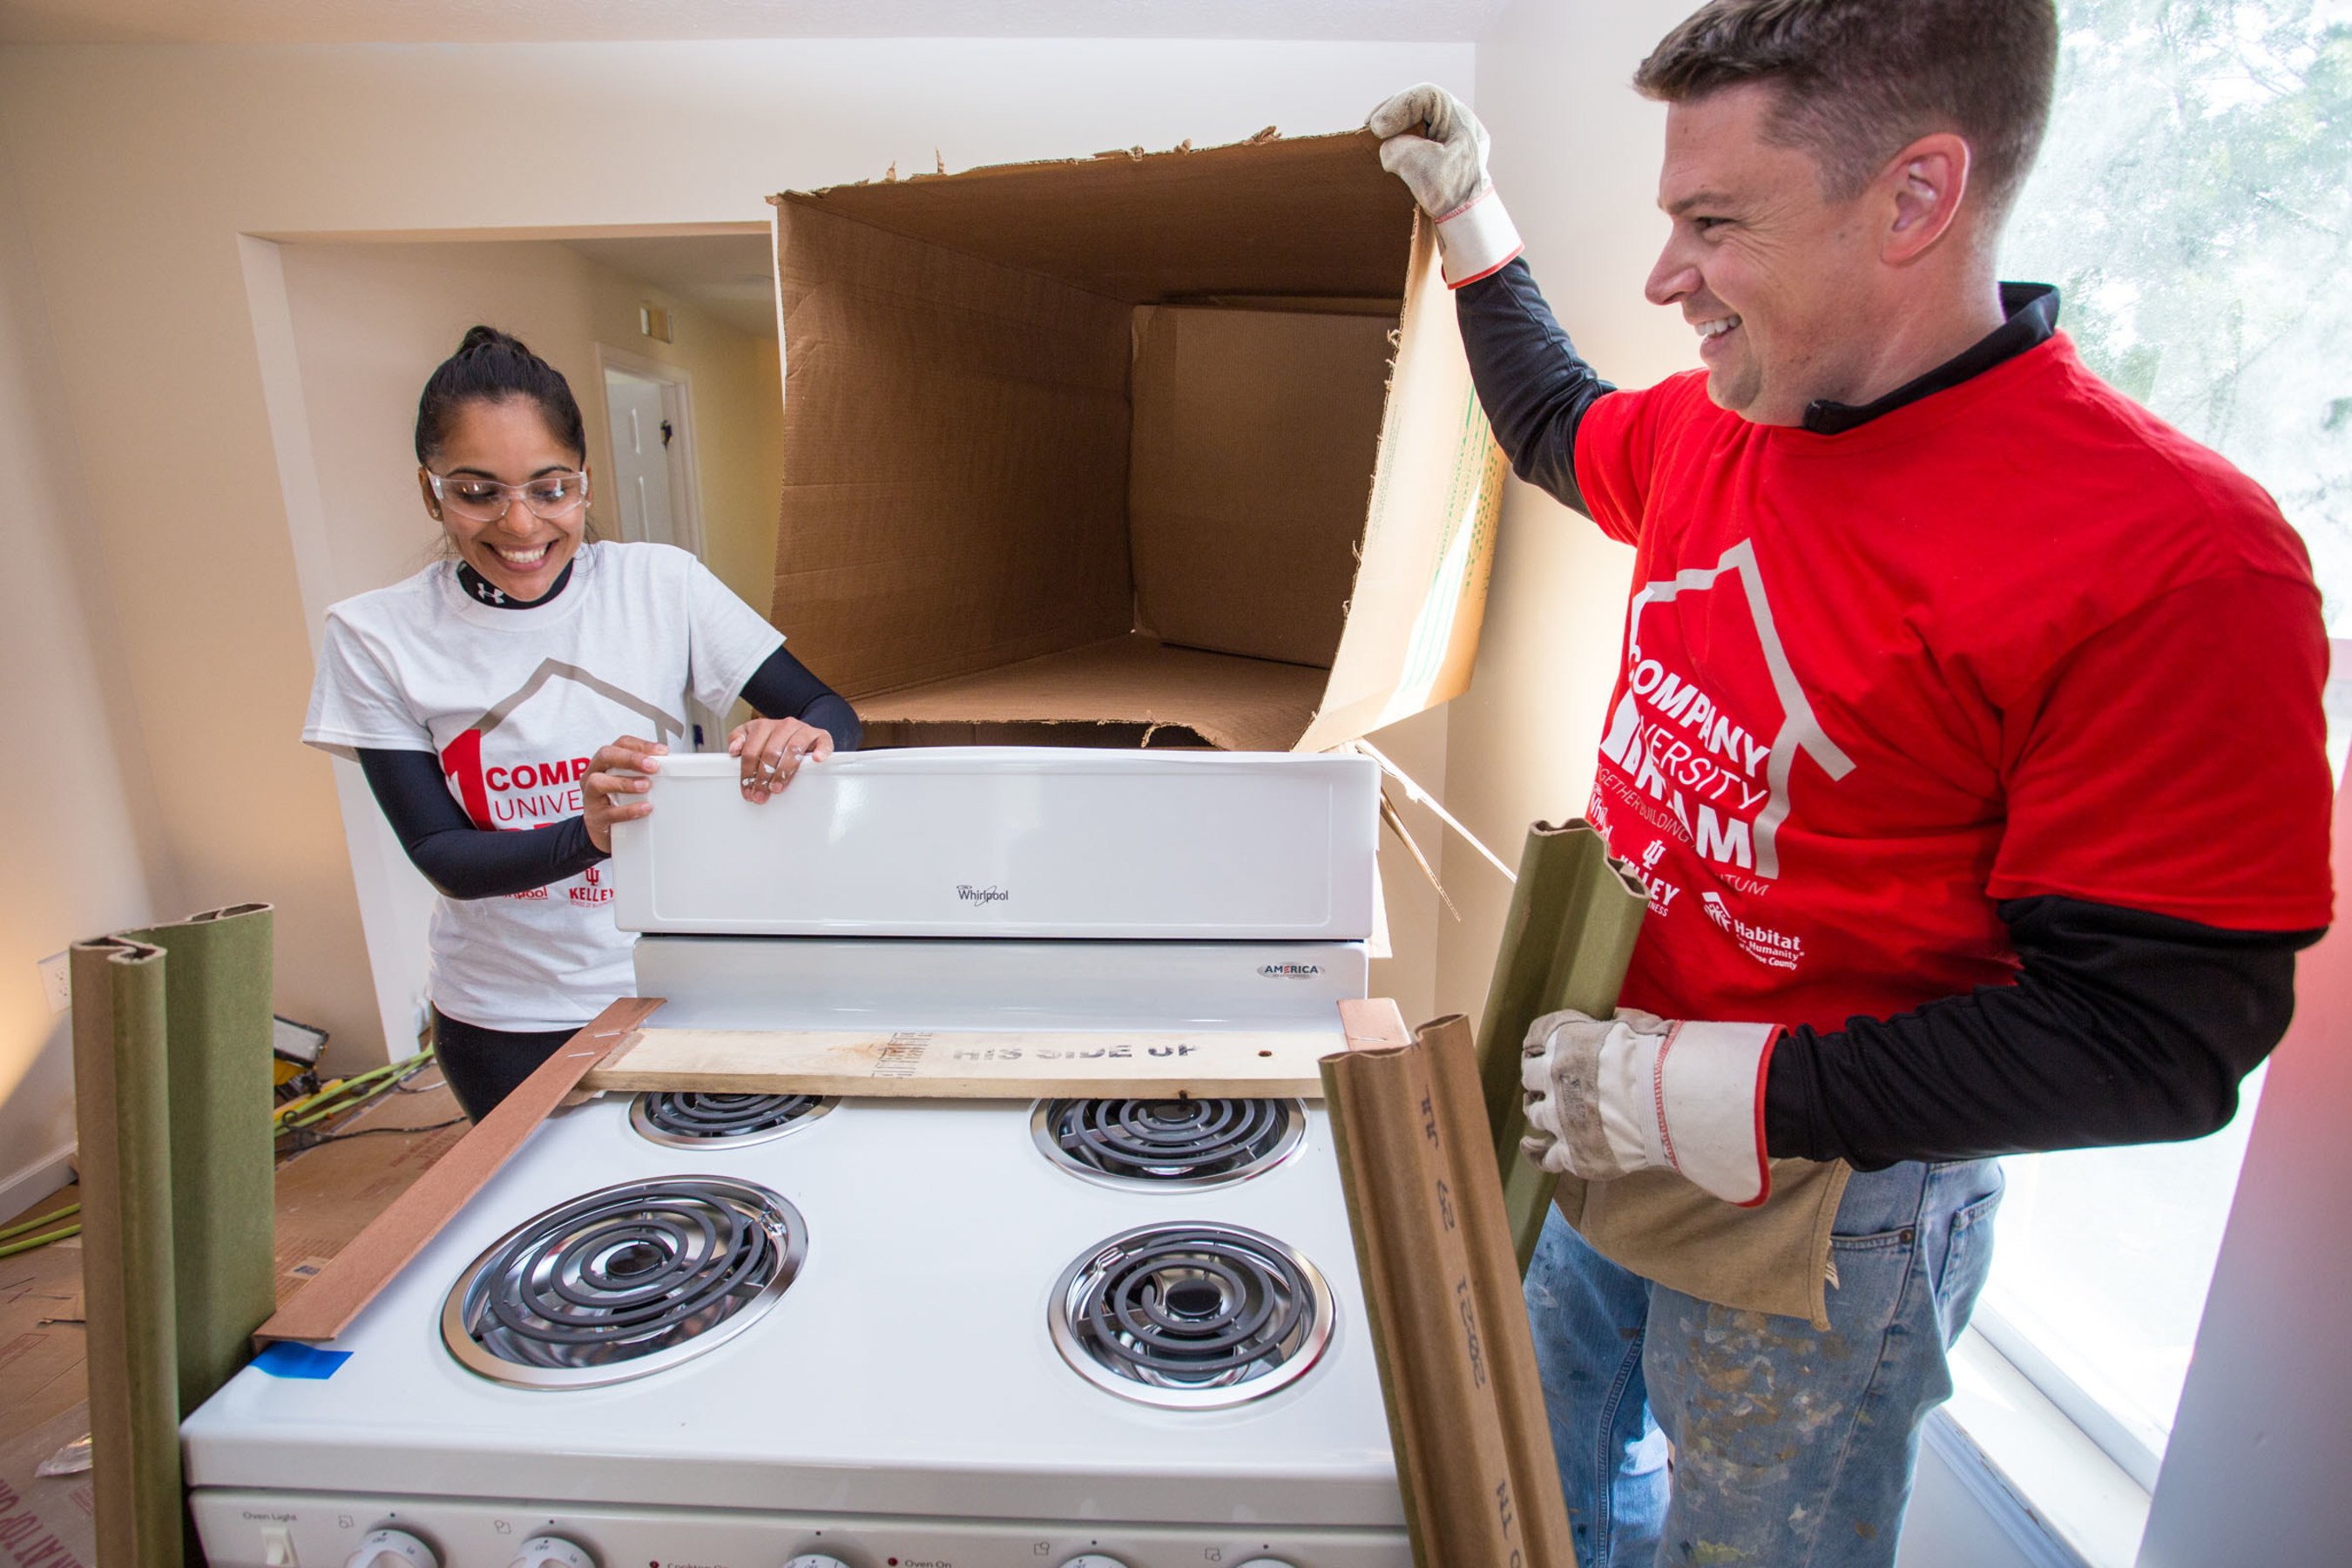 Whirlpool renews partnership with Habitat for Humanity in 2016 and will continue to provide a new range and refrigerator for every new Habitat home.